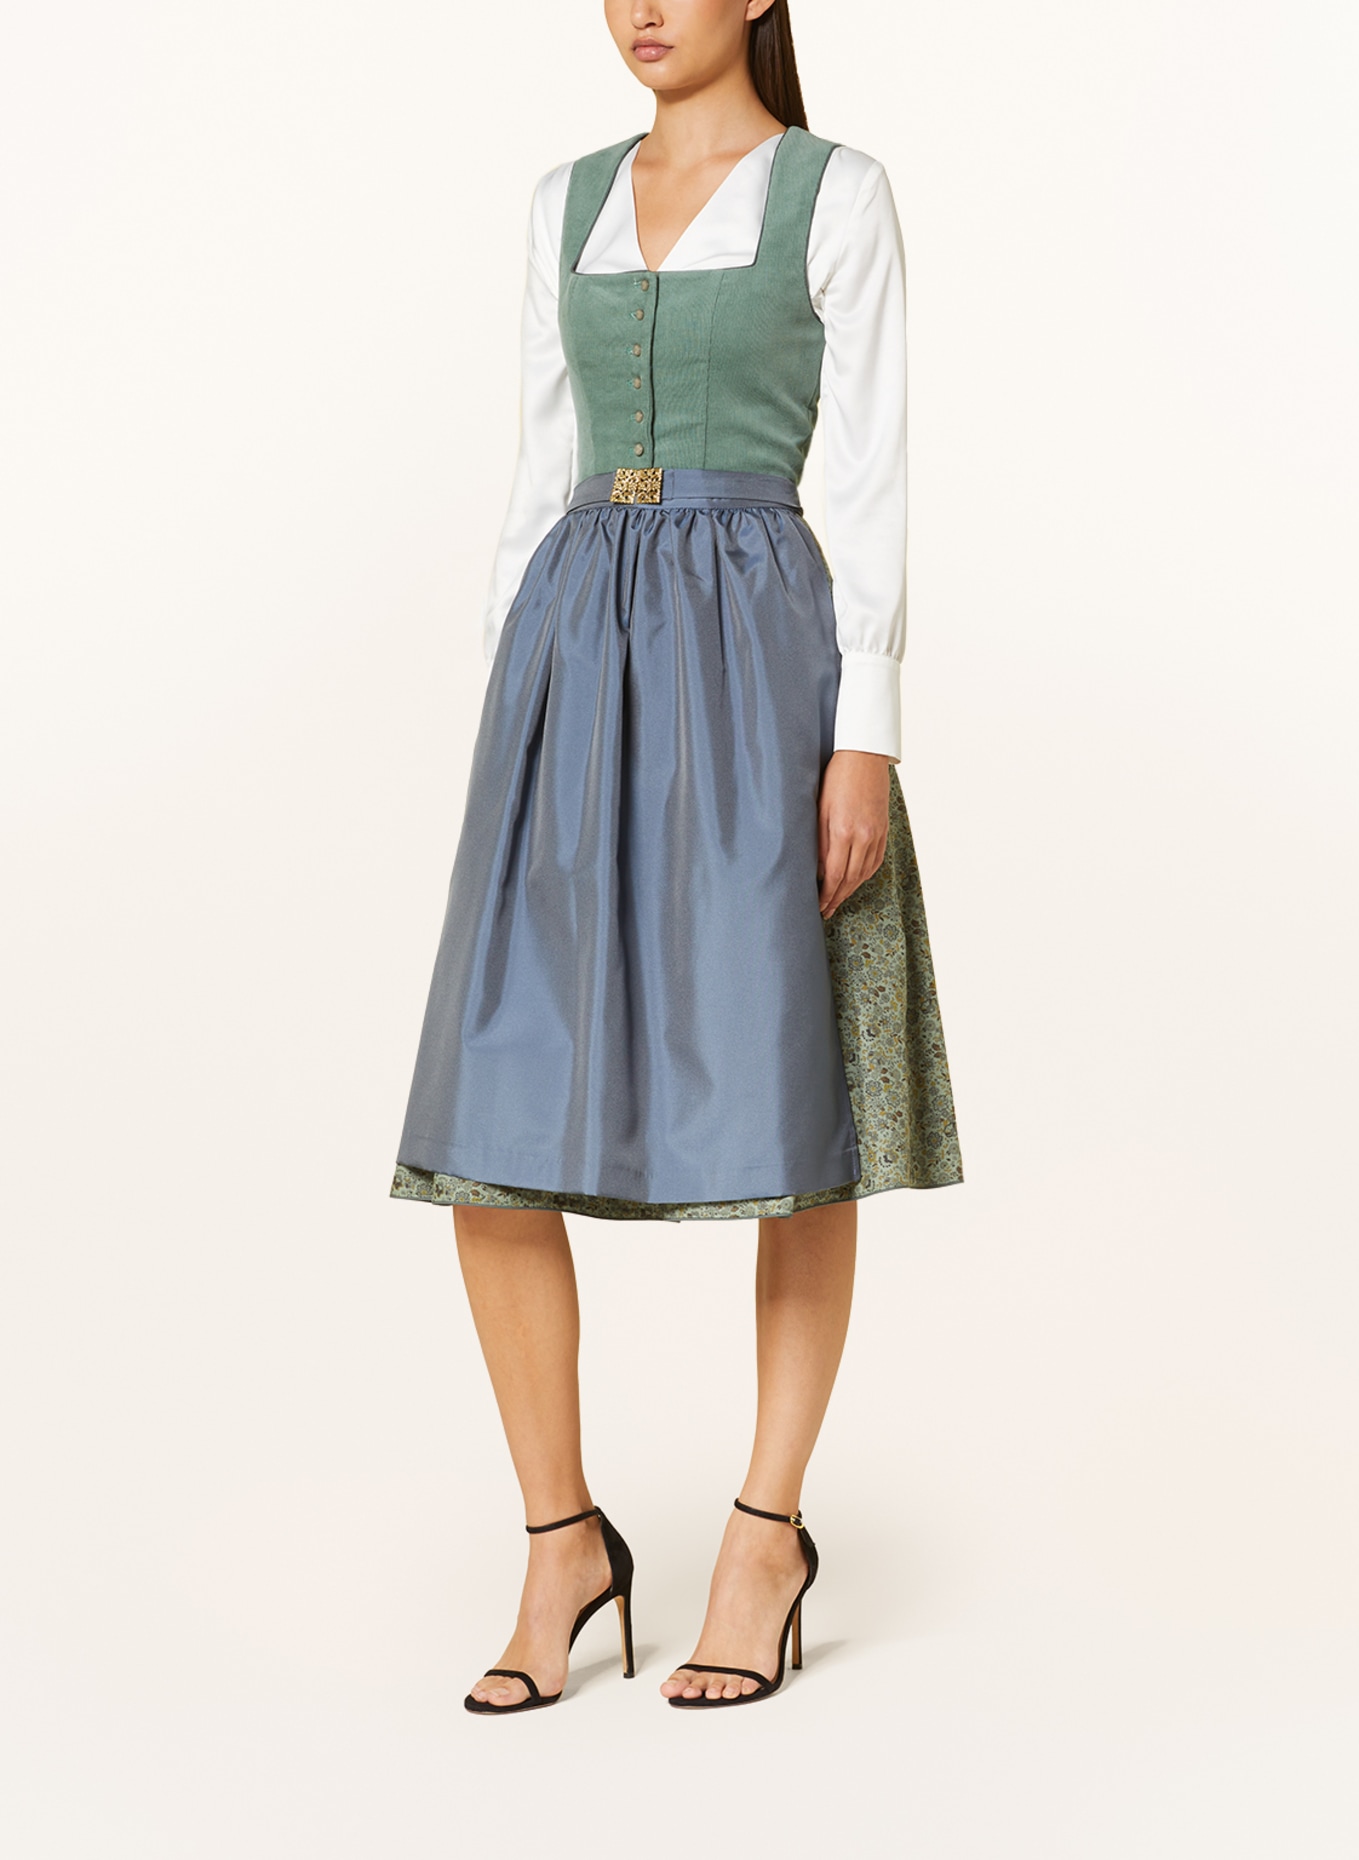 LIMBERRY Dirndl blouse made of satin, Color: WHITE (Image 4)